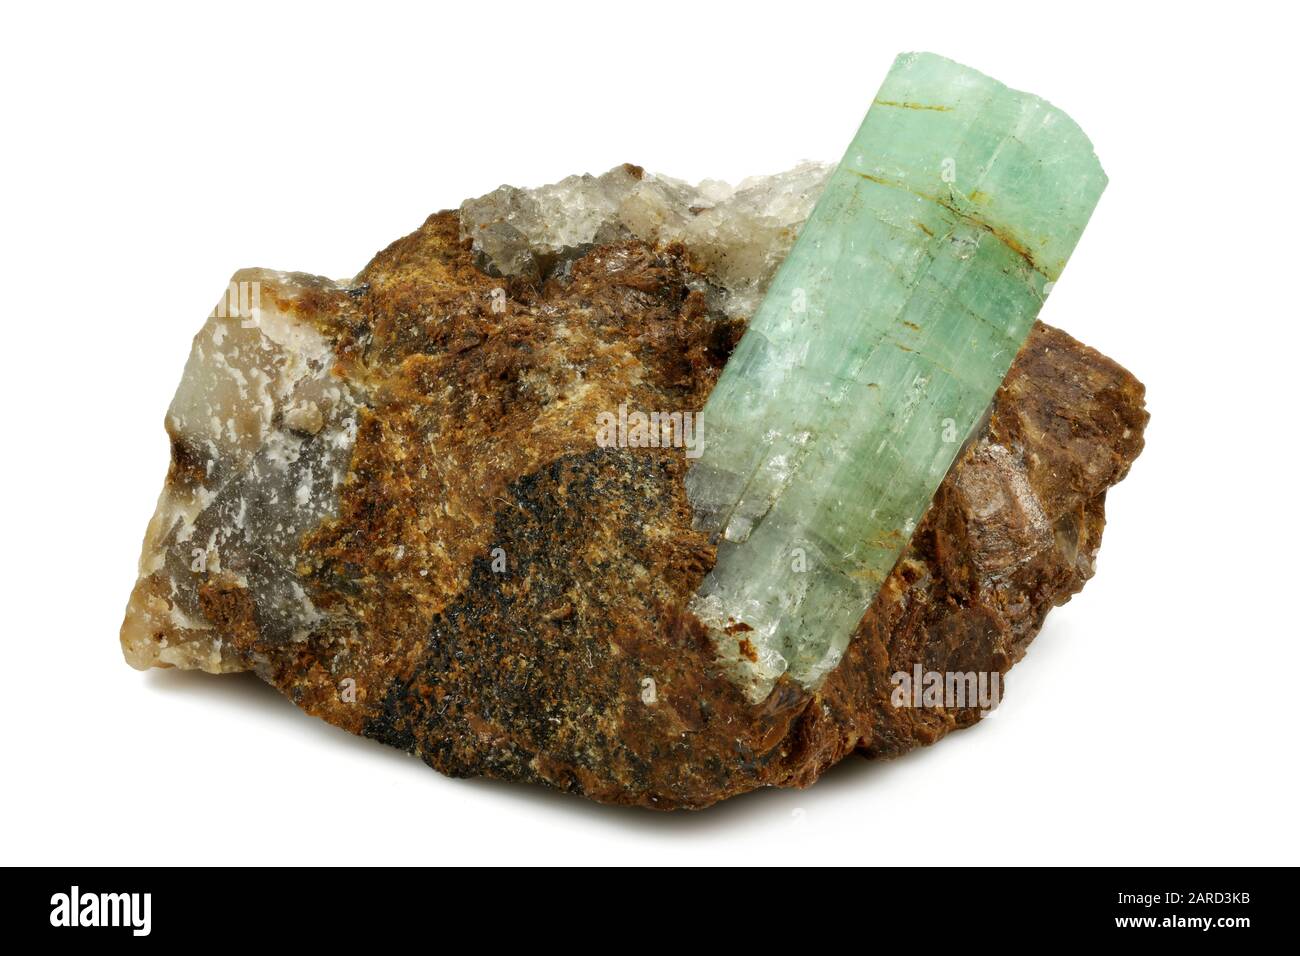 emerald on matrix from Panjshir, Afghanistan isolated on white background Stock Photo